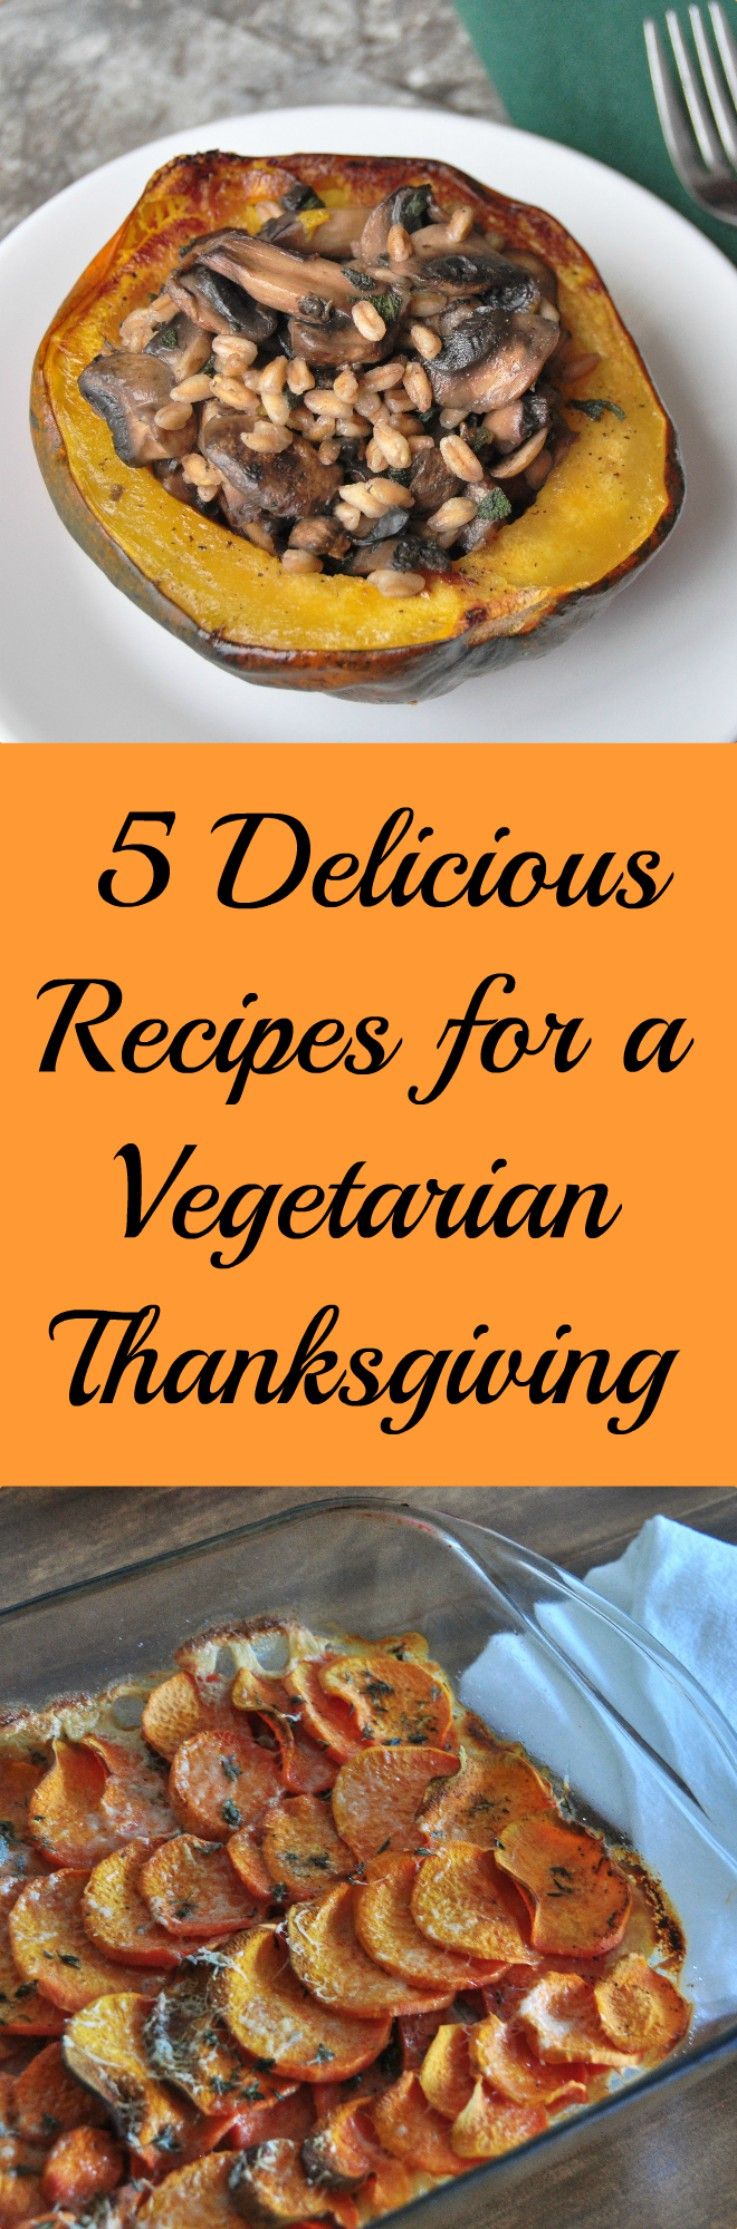 5 Delicious Recipes for a Vegetarian Thanksgiving